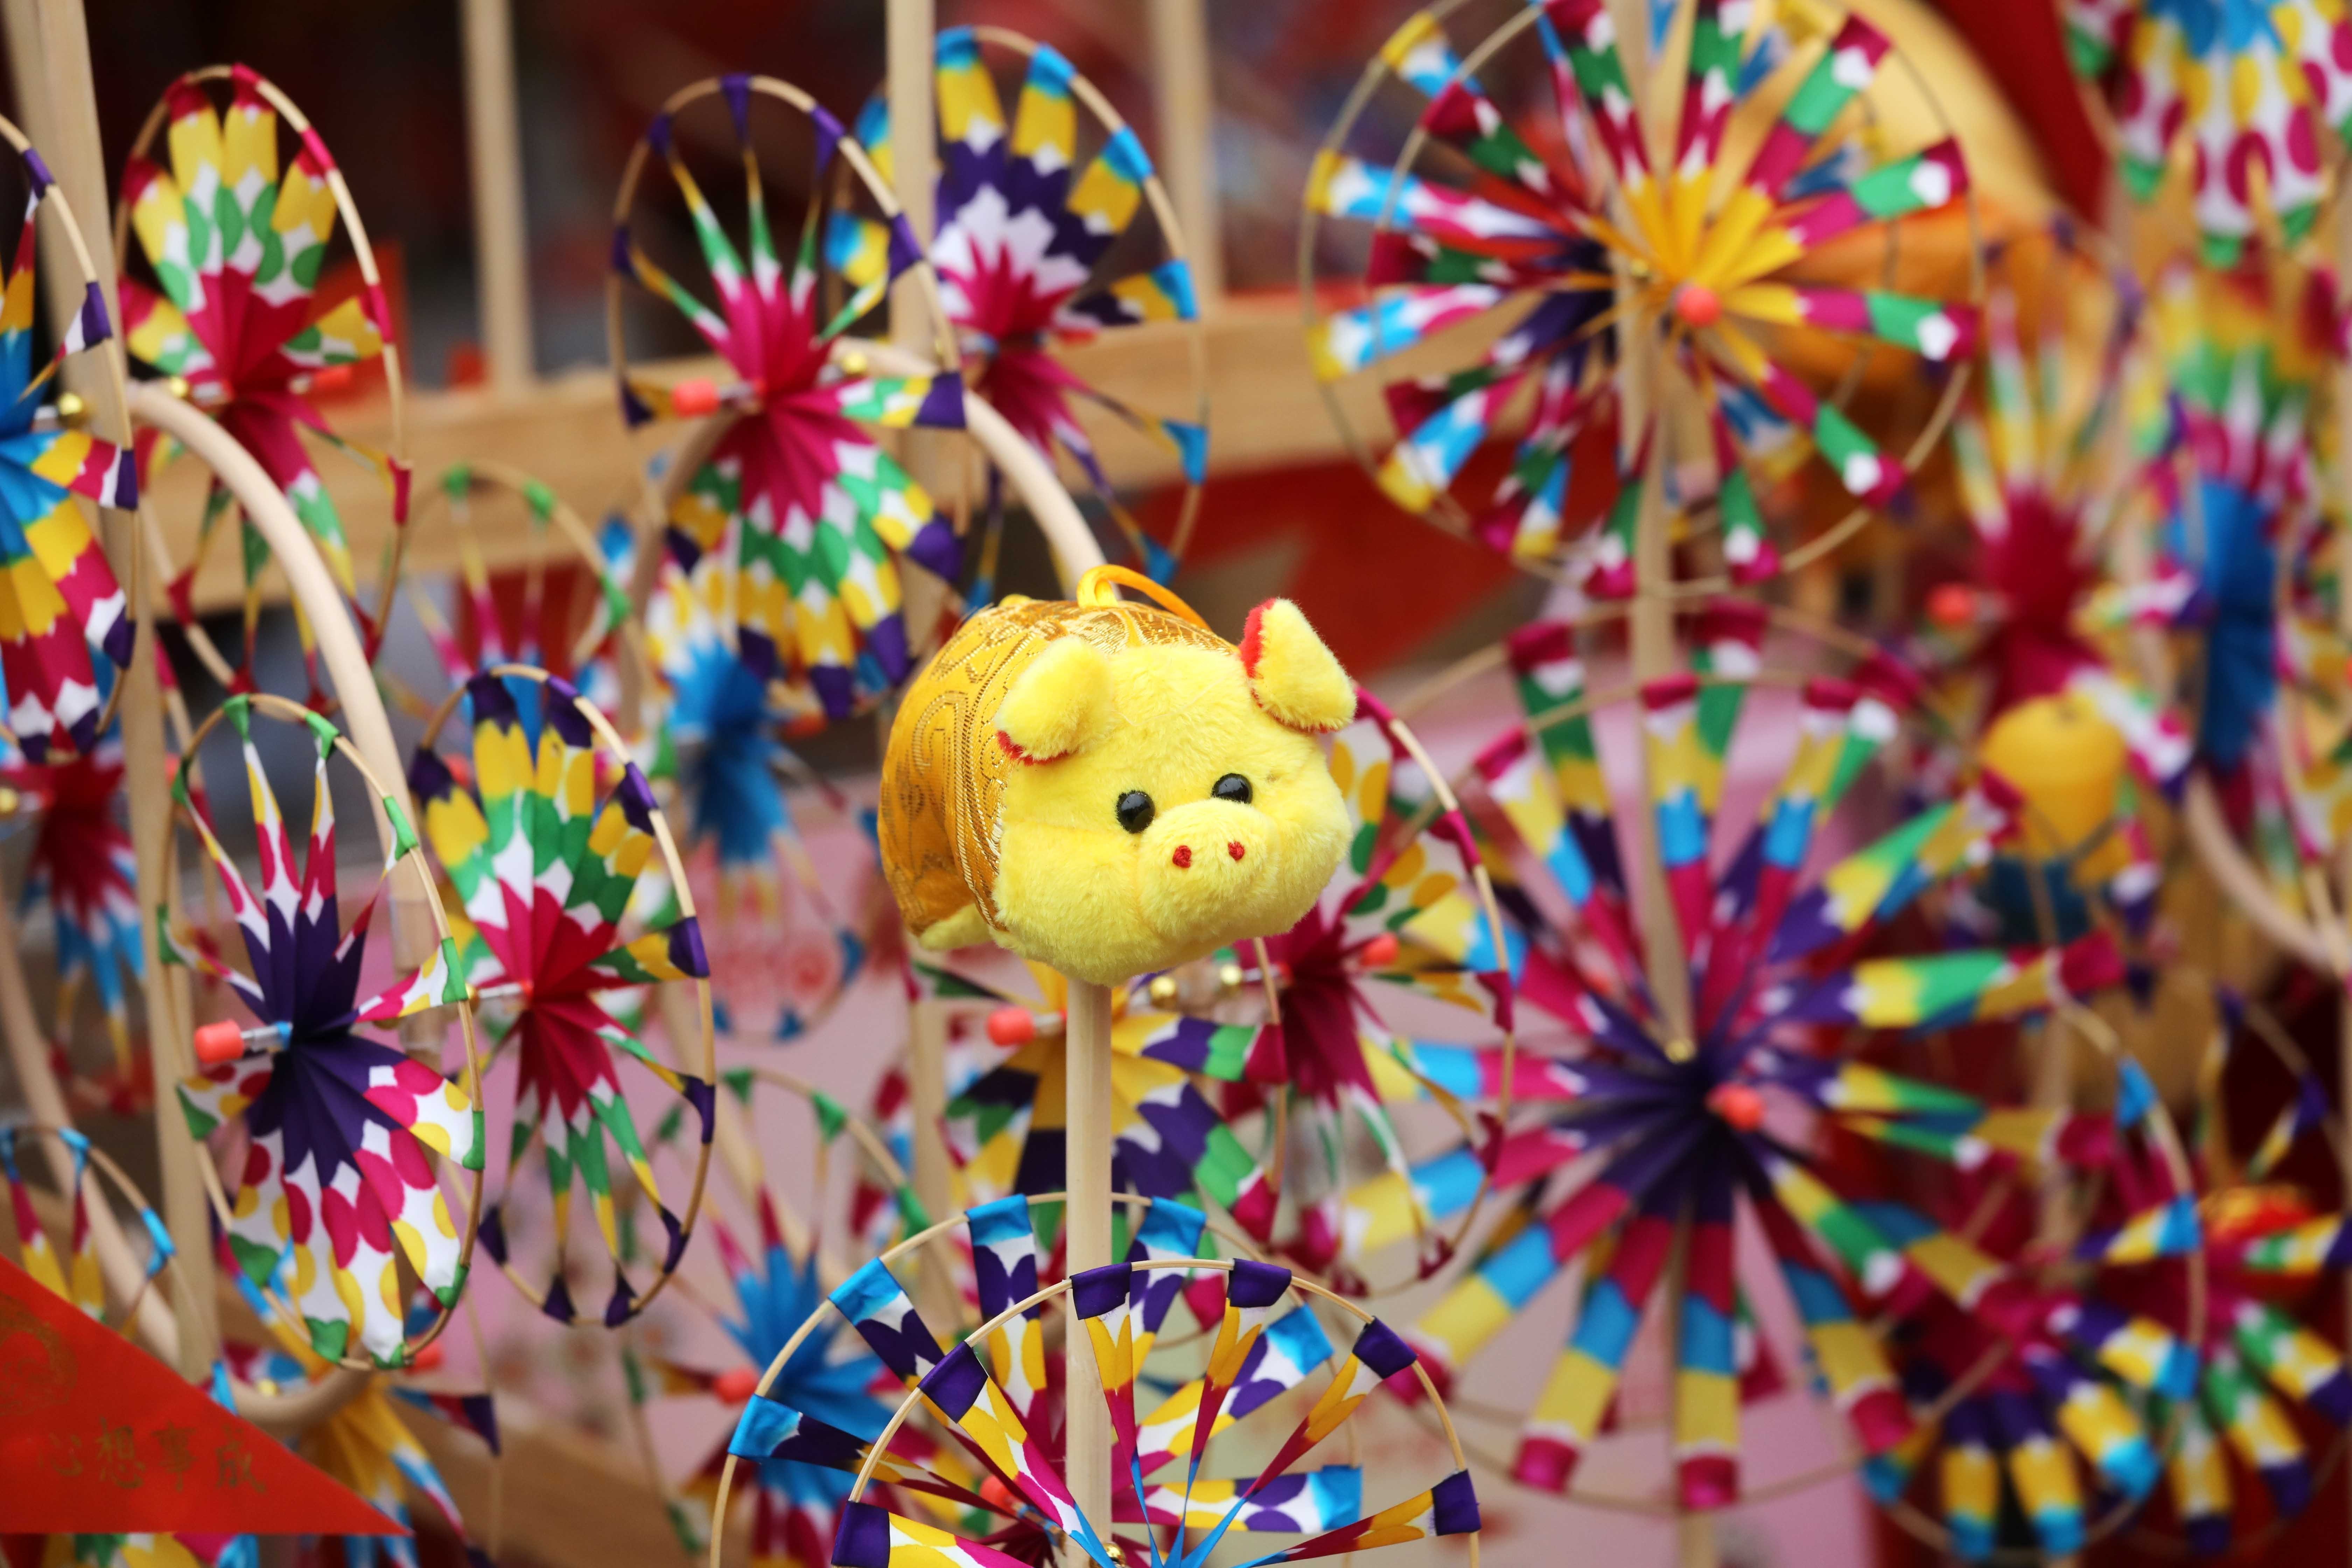 A windmill topped by a pig is on display at the Lunar New Year fair market at Victoria Park, Causeway Bay, on February 1. Predictions for Hong Kong’s future are commonly made during the Lunar New Year festival. Photo: Dickson Lee